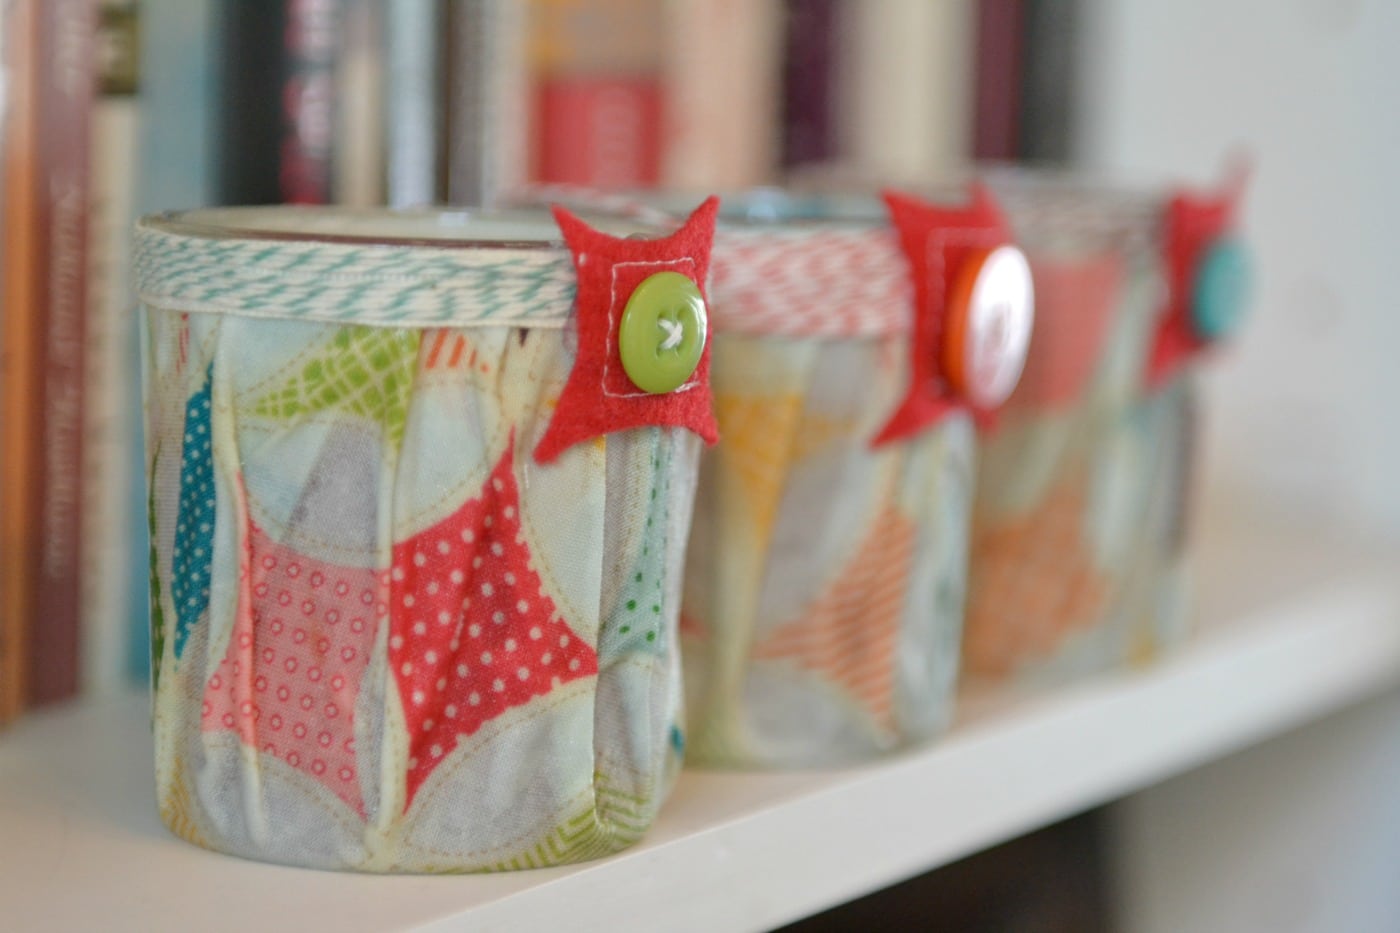 Amazing Handmade DIY Gifts For Under $10 - The Cottage Market